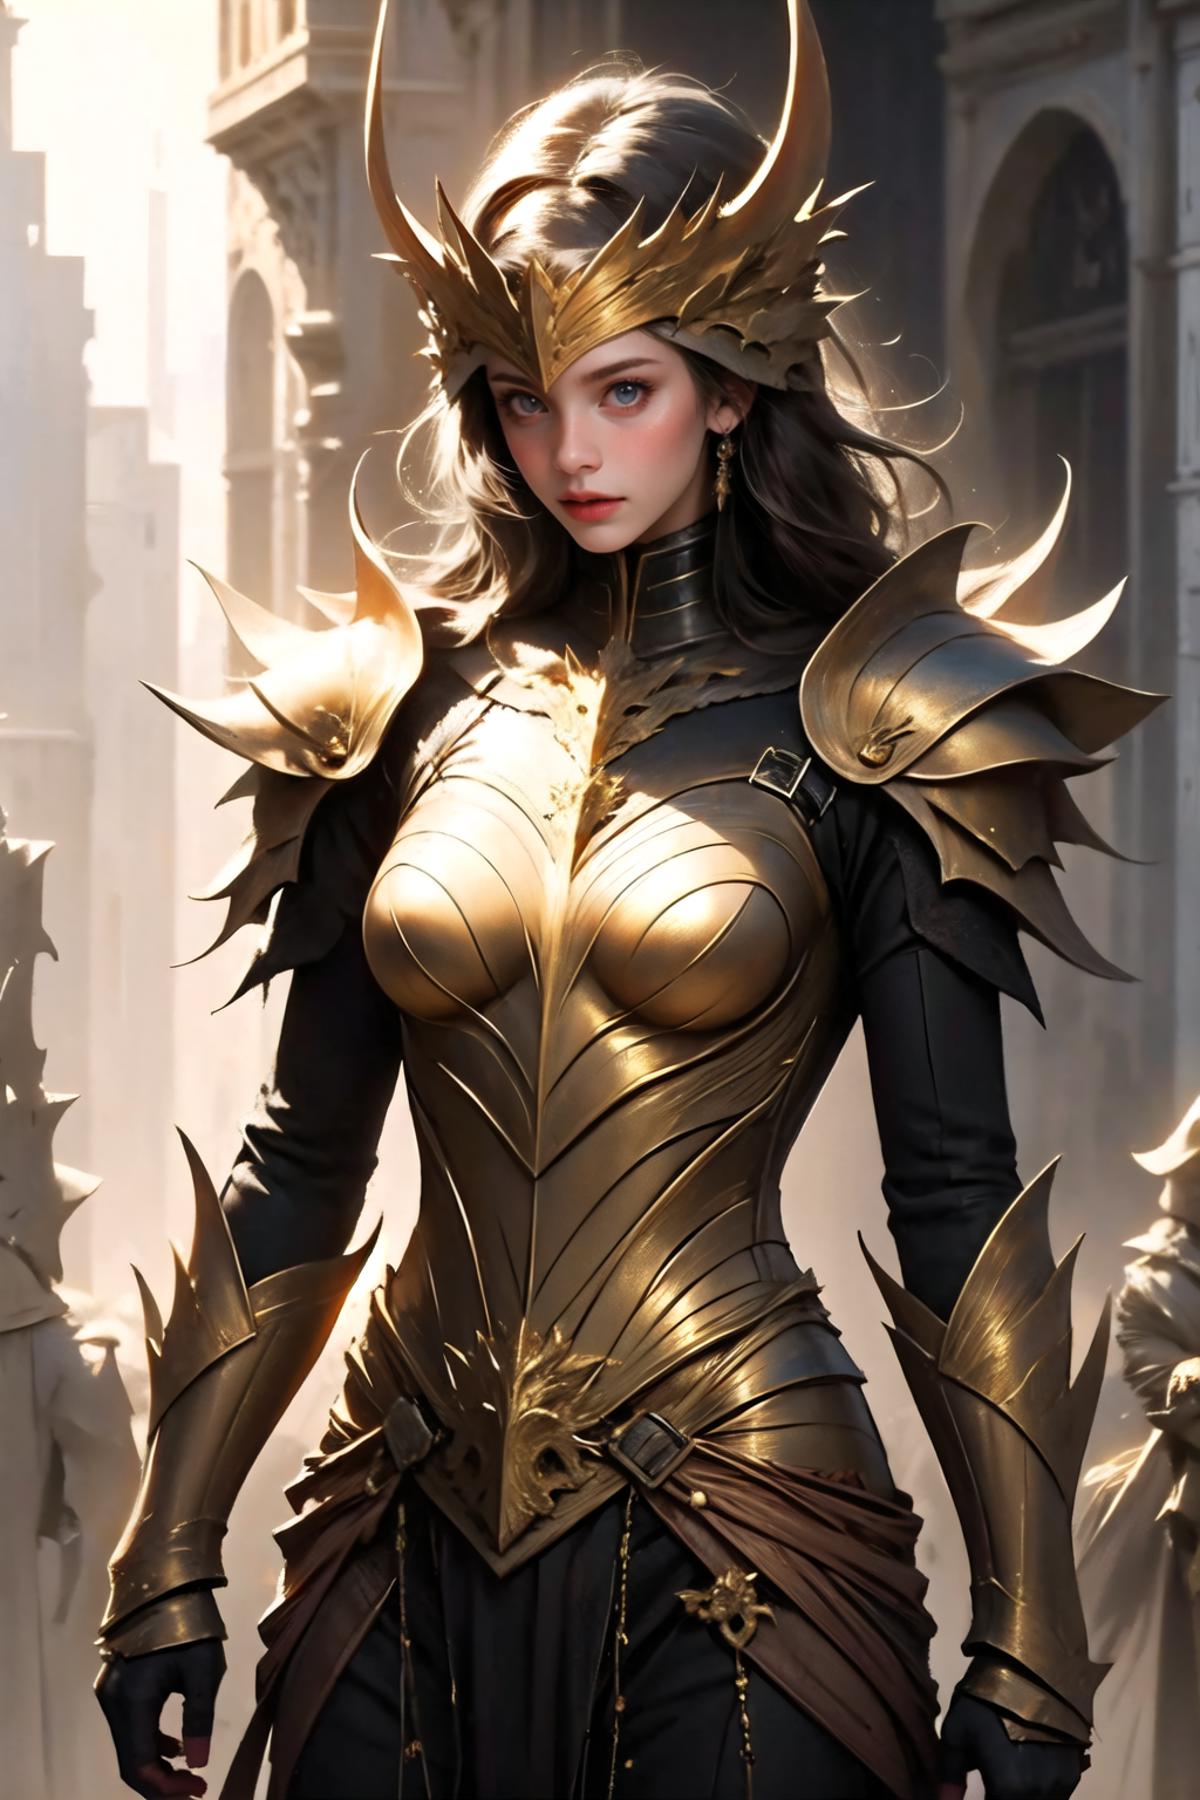 A beautifully drawn illustration of a woman wearing a gold armor and a helmet.